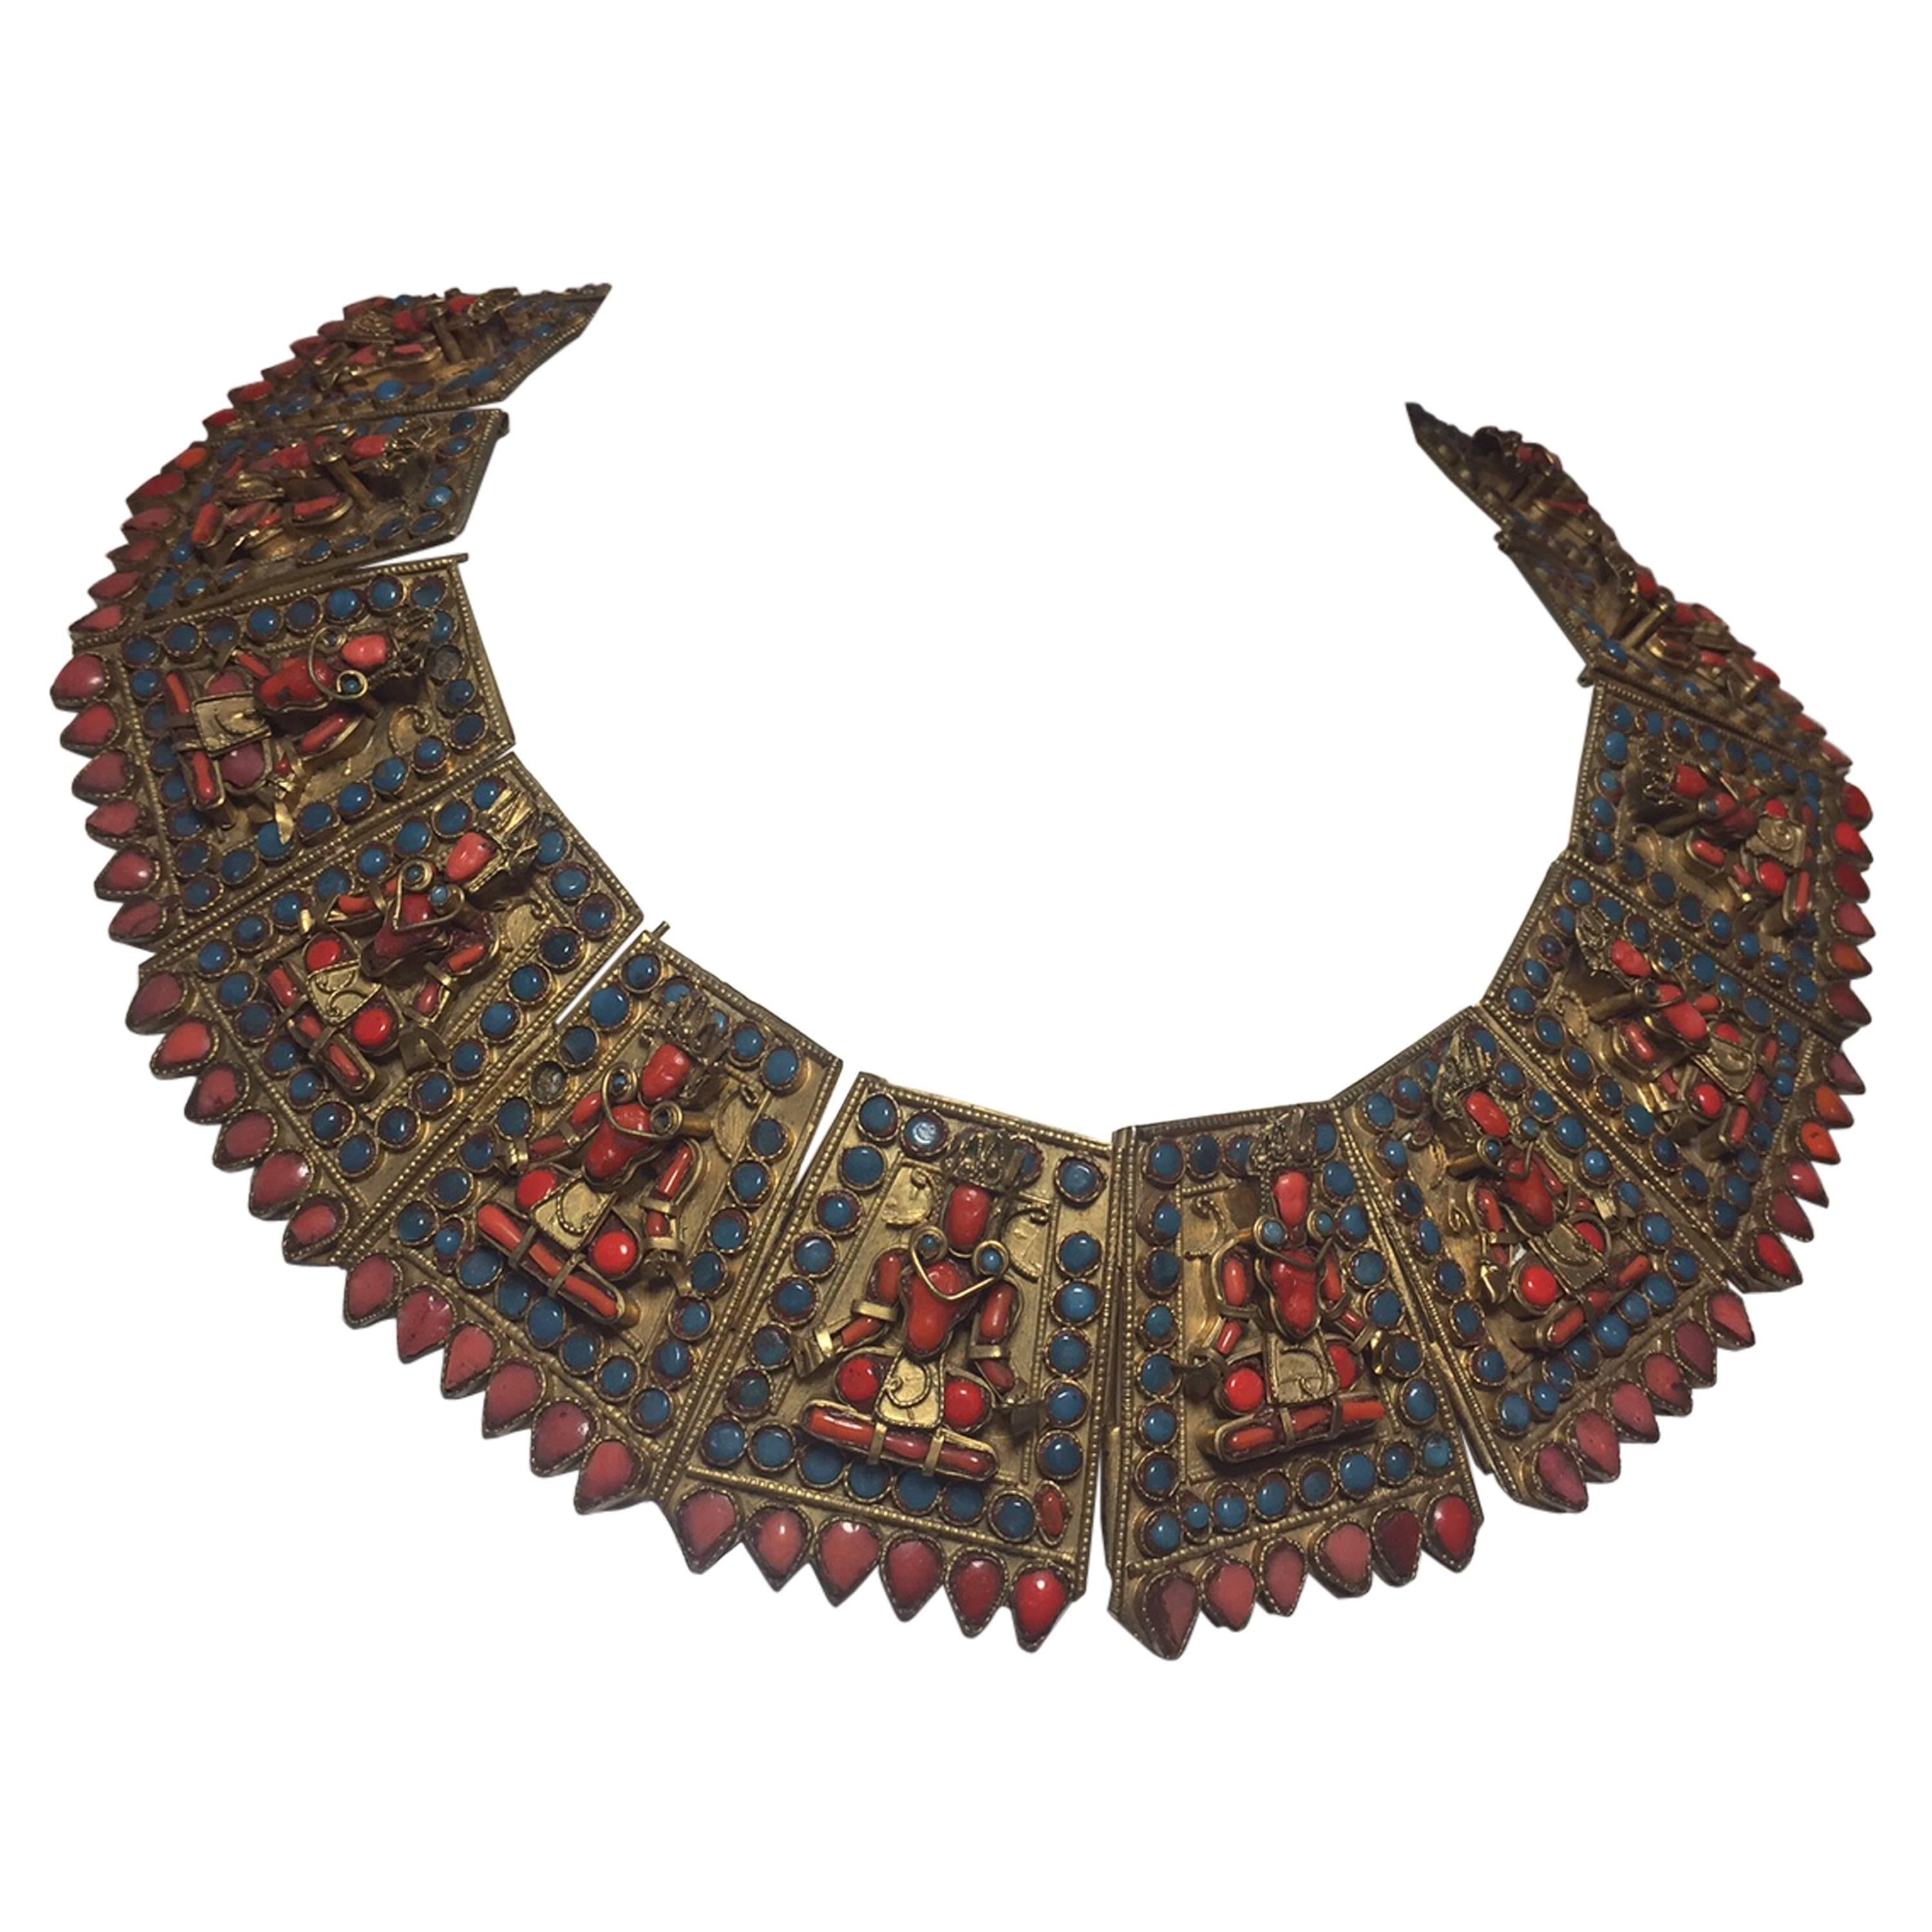 Antique Ethnic Bib Collar Necklace w/ Coral and Turquoise Inset Figures